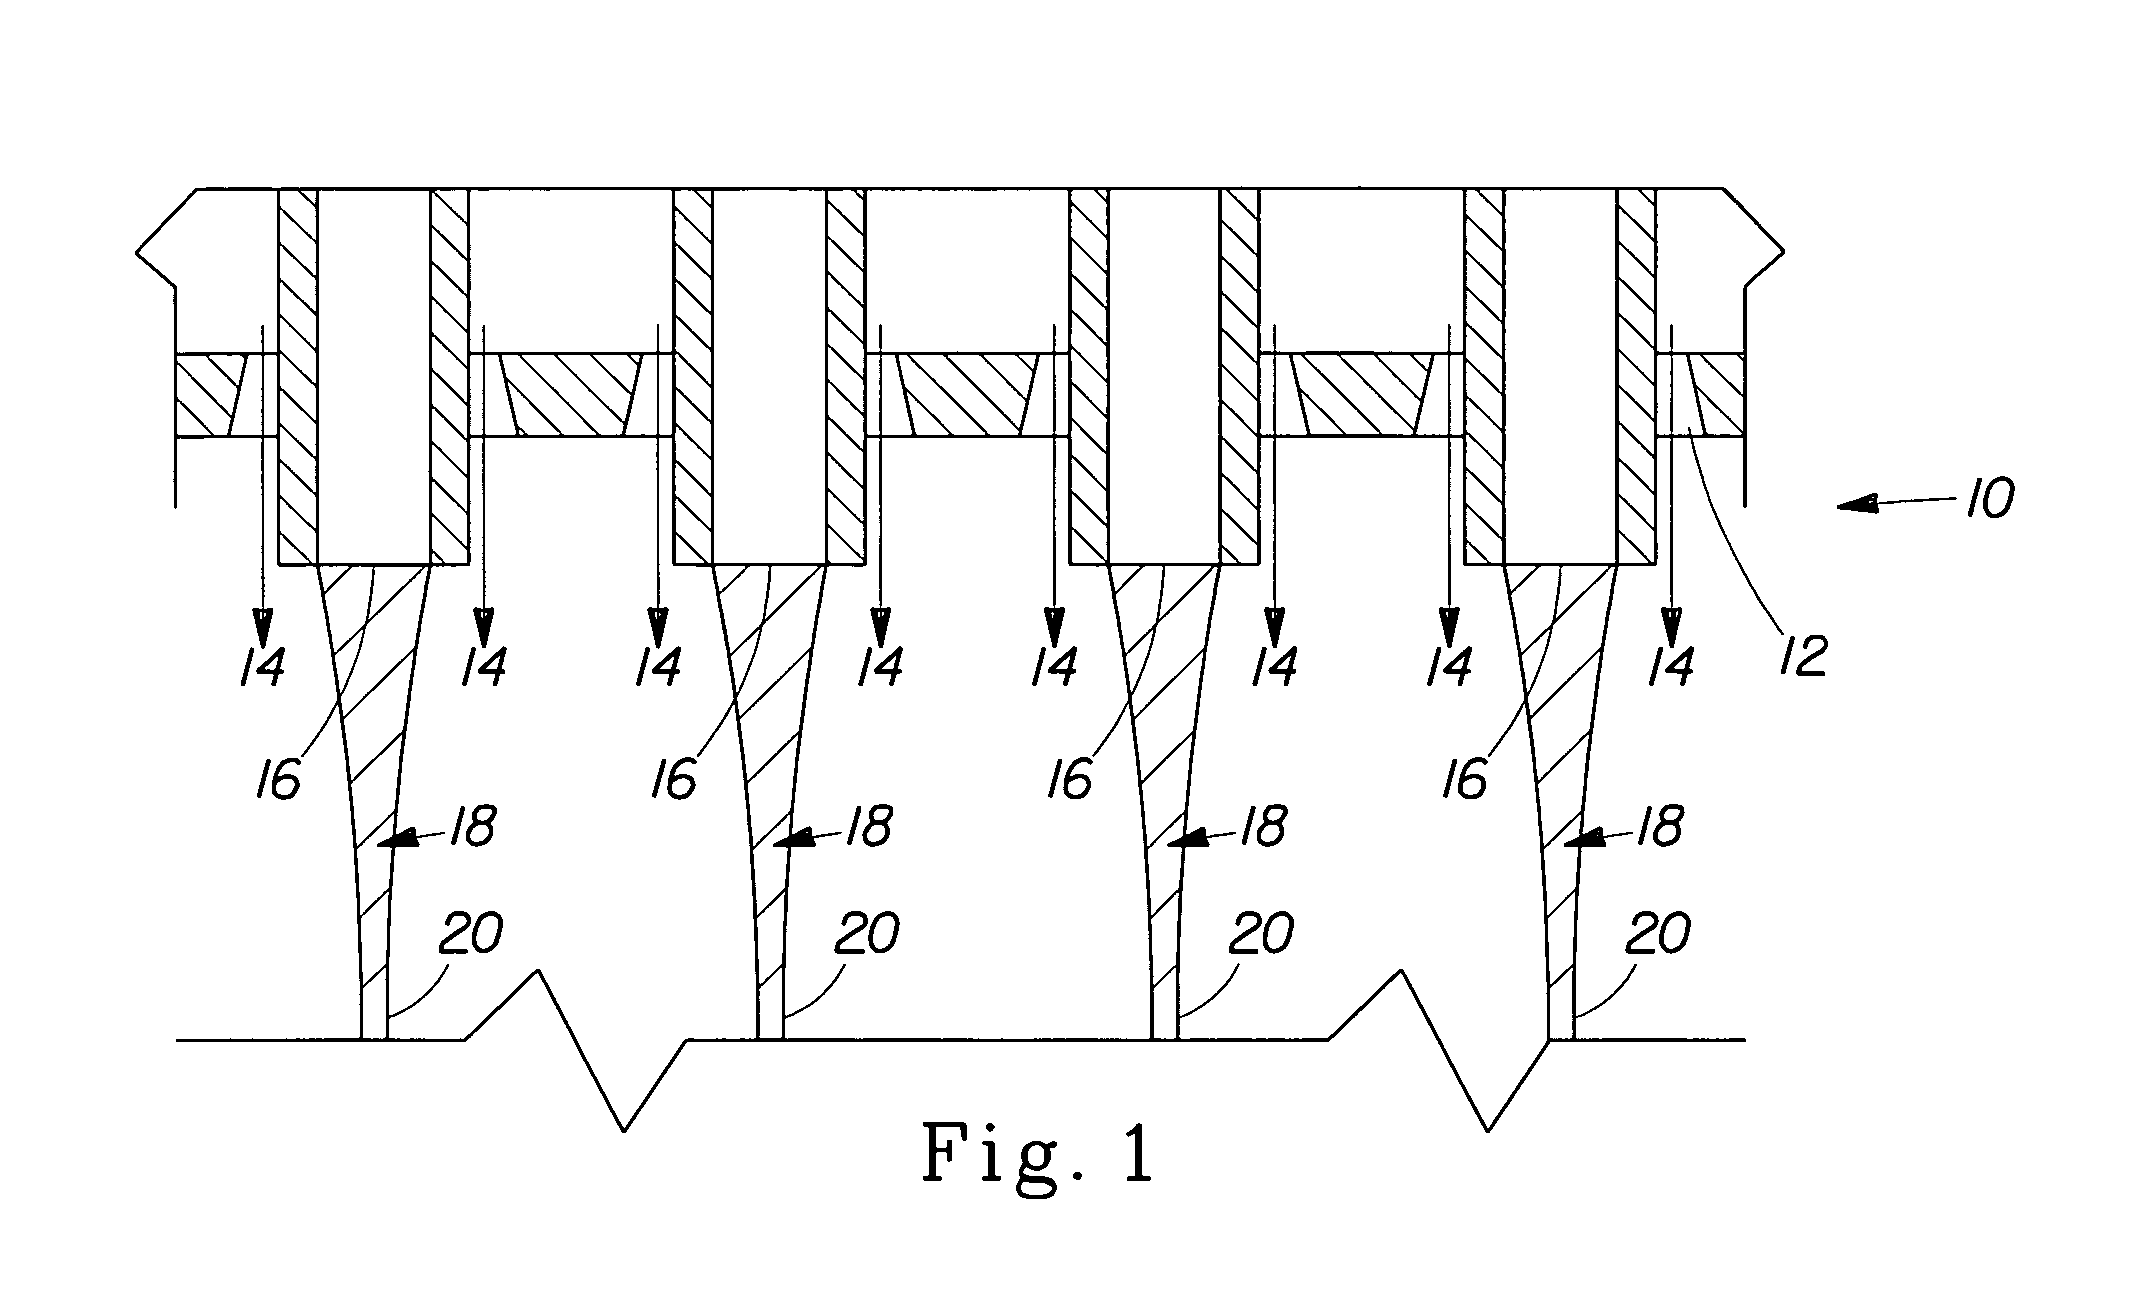 Rotary spinning processes for forming hydroxyl polymer-containing fibers